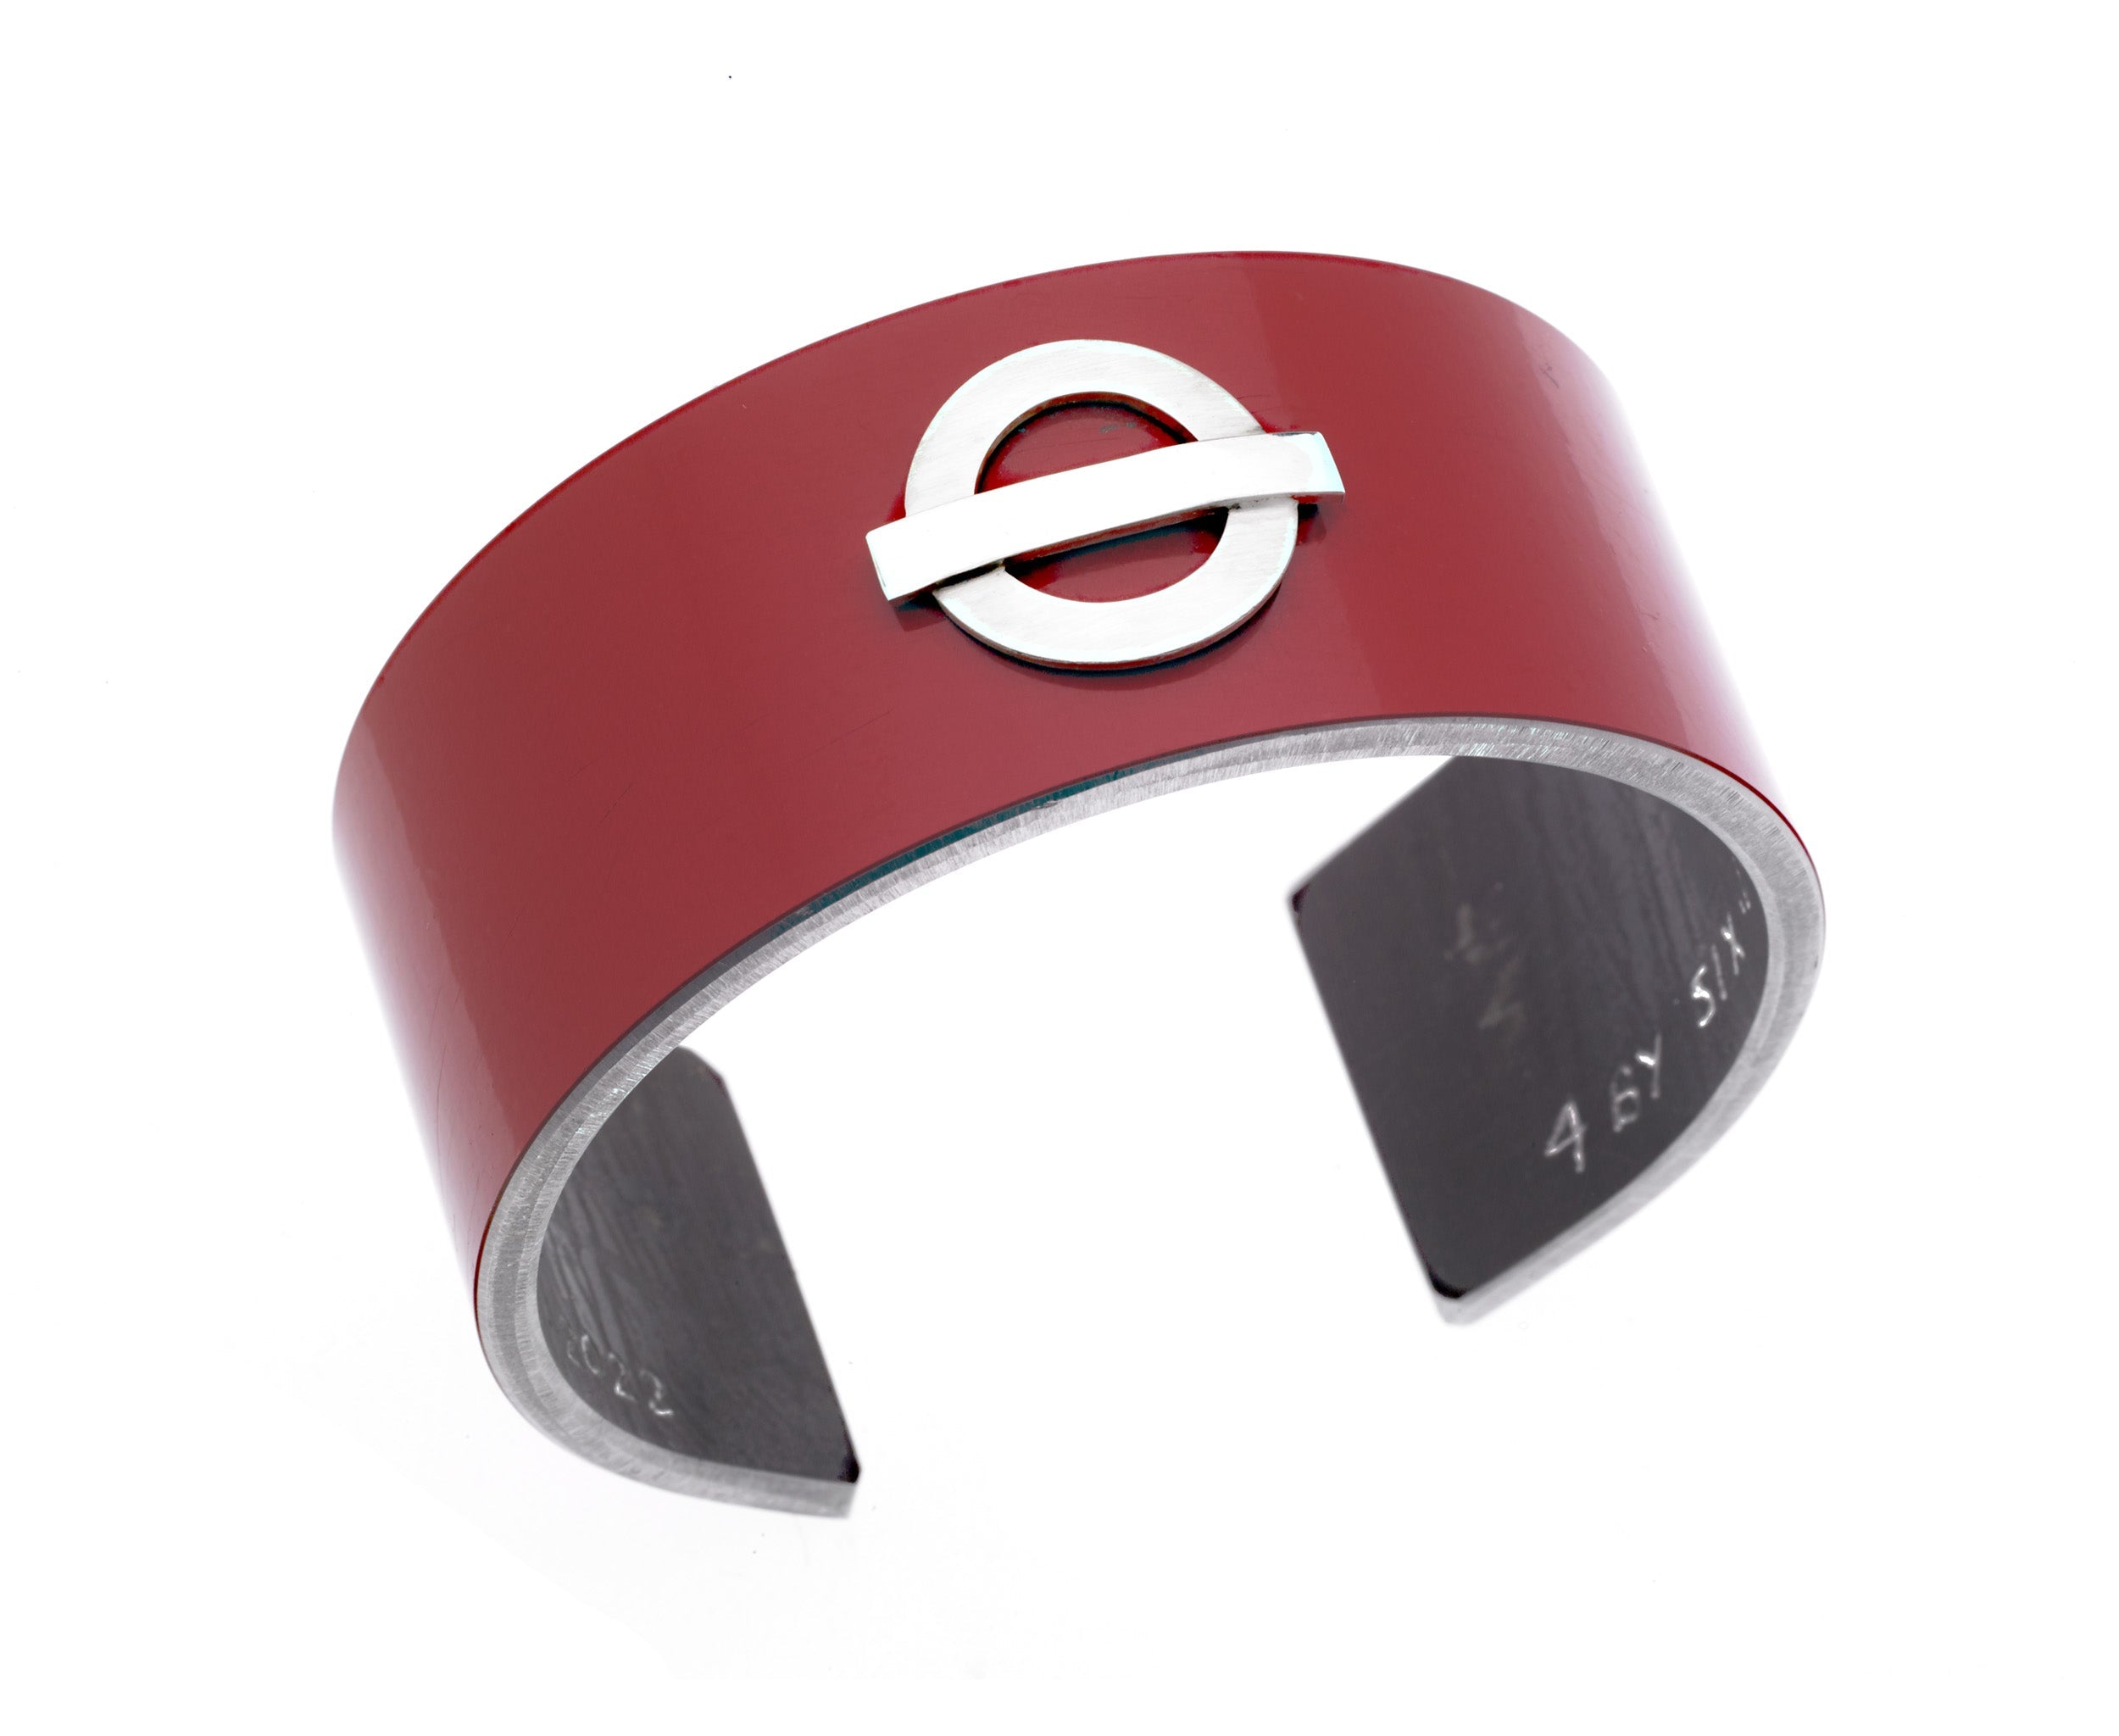 London doubledecker bus panel, turned into a bracelet with a tube symbol on it